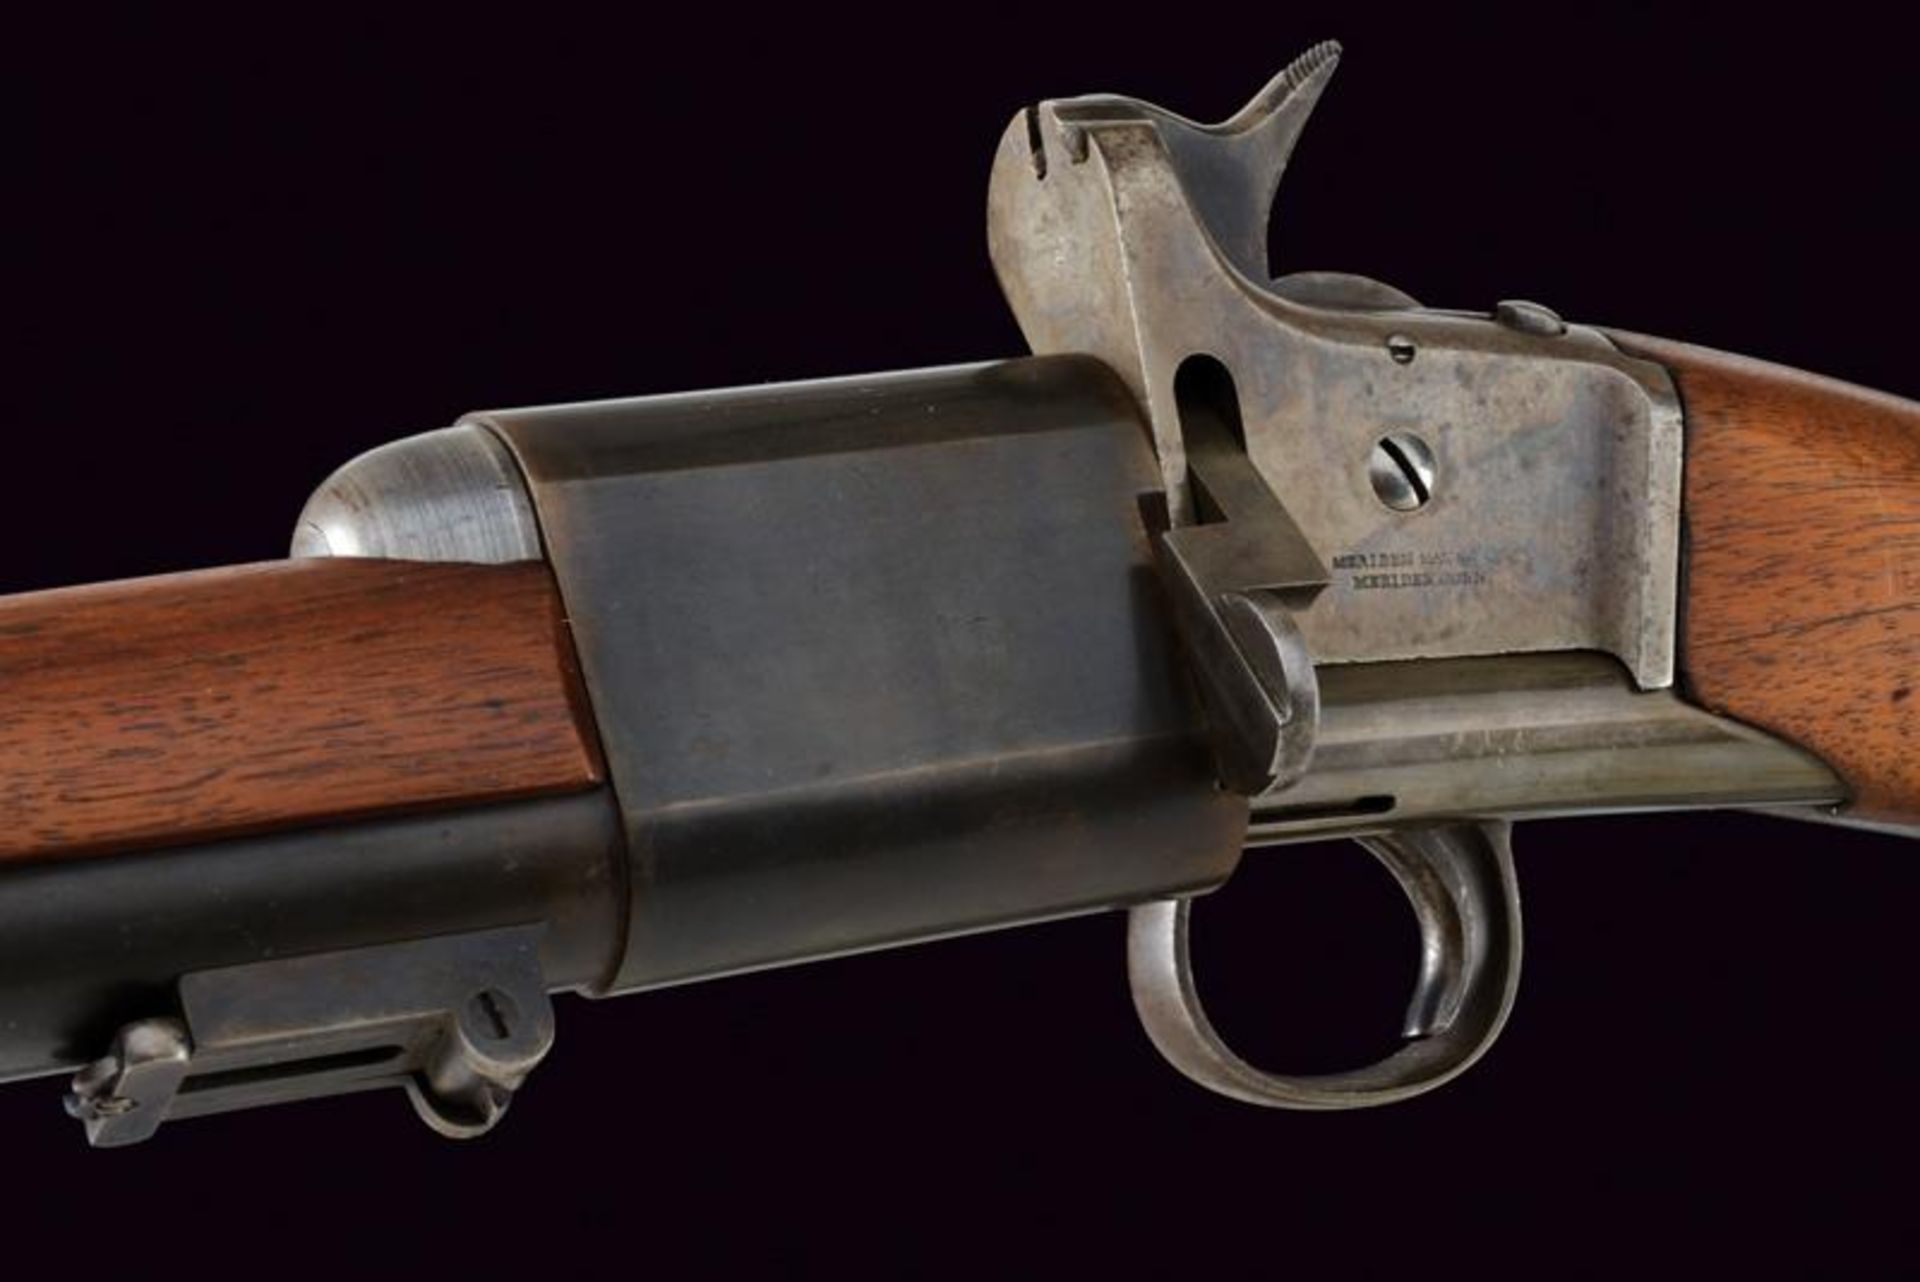 A rare Triplett & Scott Repeating Carbine by Meriden - Image 10 of 11